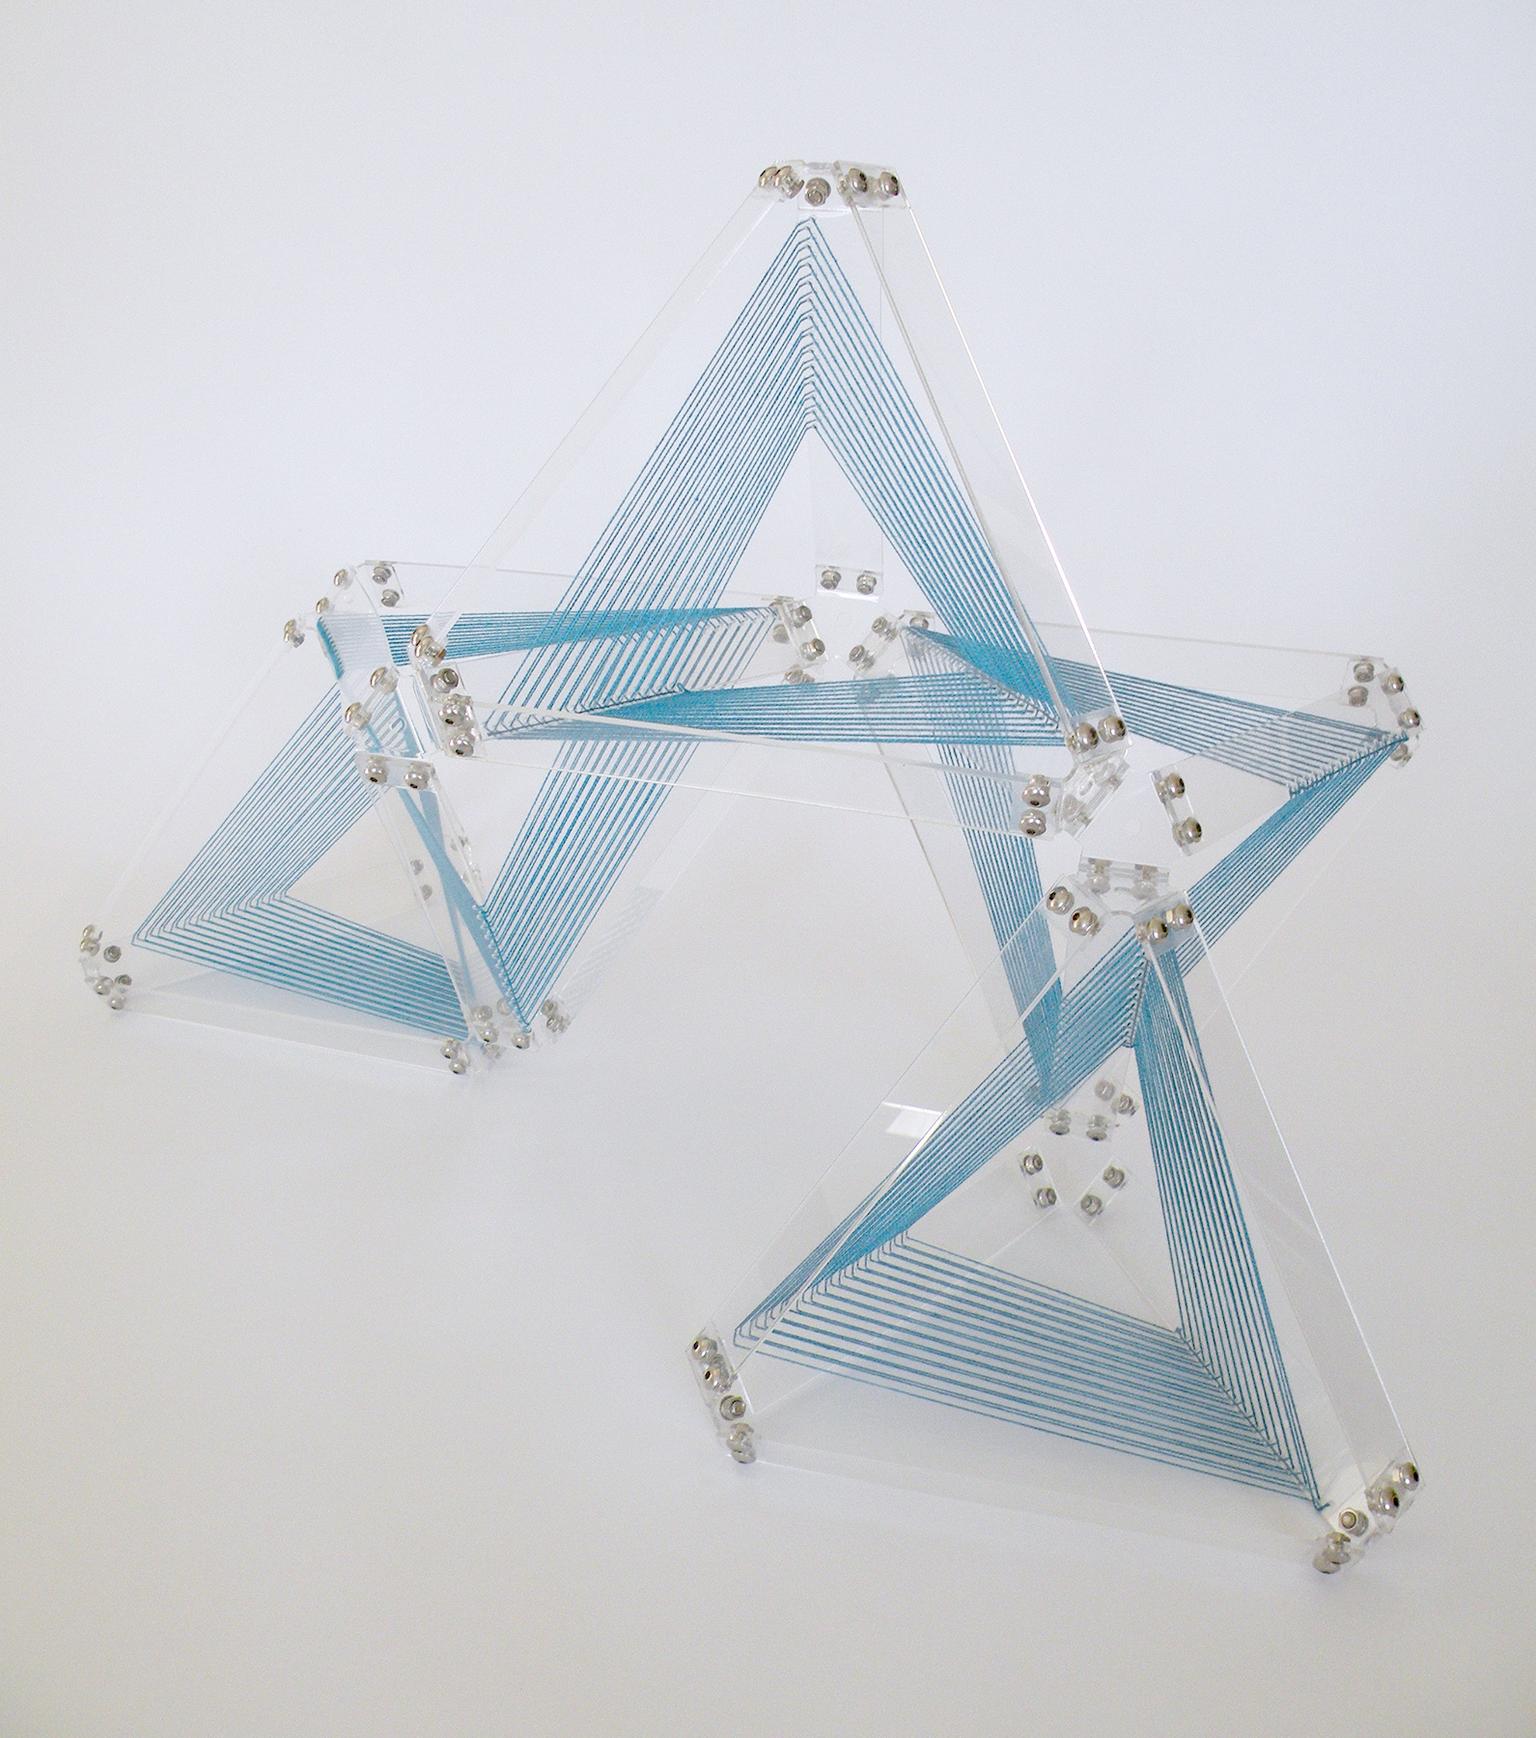 Image for entry 'Tetrahedra Twist: Five Shades of Blues'